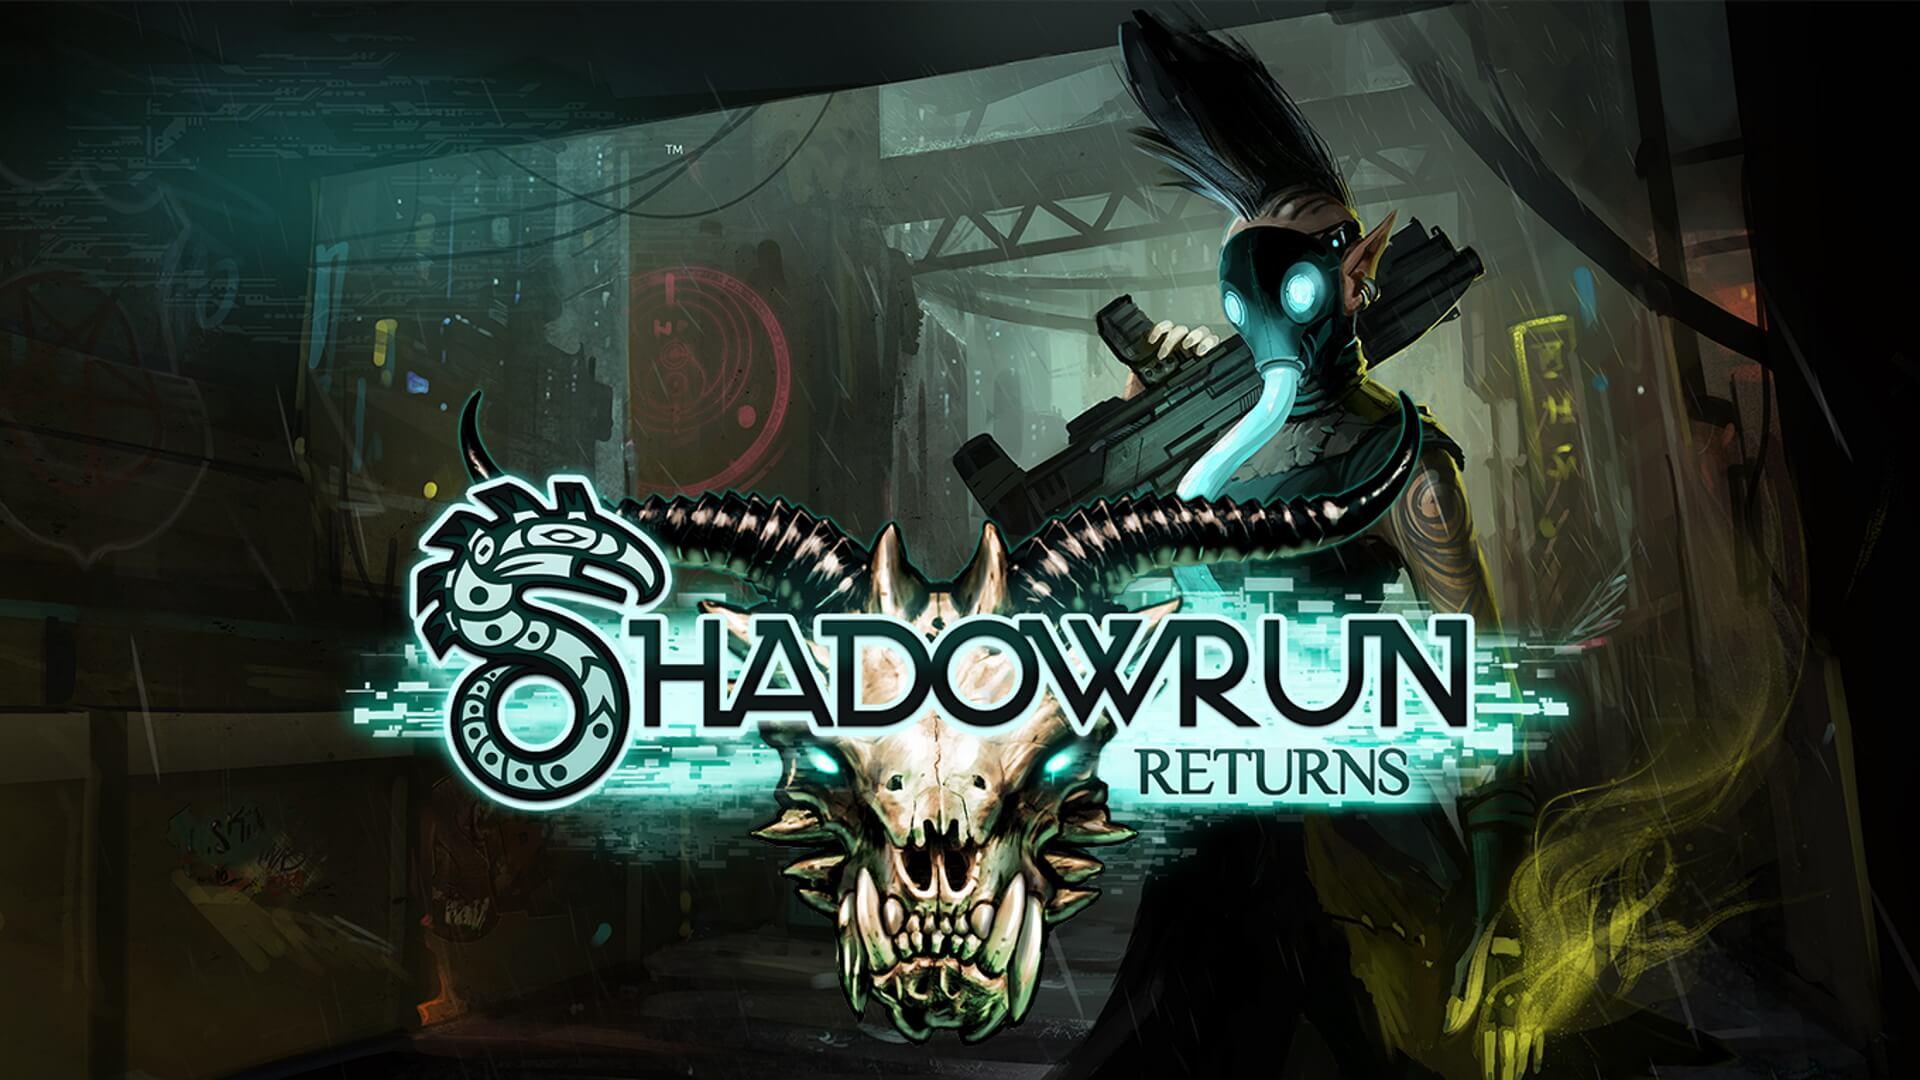 Free Shadowrun Returns Ended Pivotal Gamers - roblox shadow run codes 2020